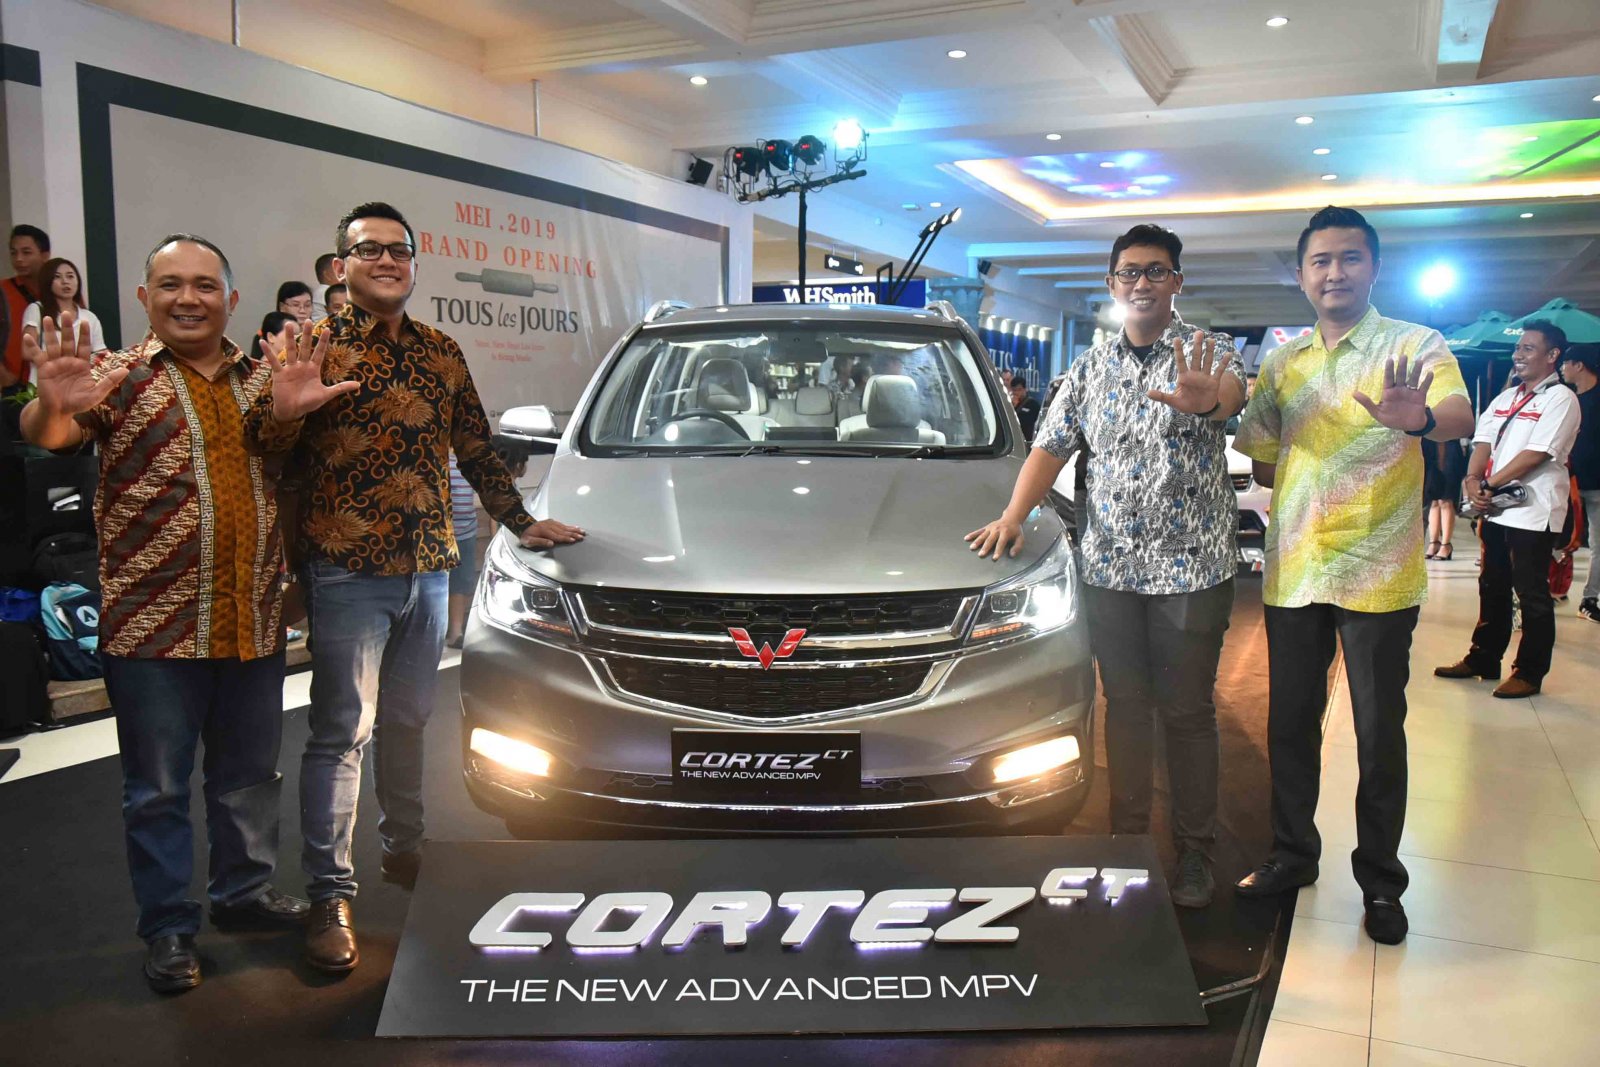 Image Wuling Officially Presents Cortez CT & Confero S ACT in Bali